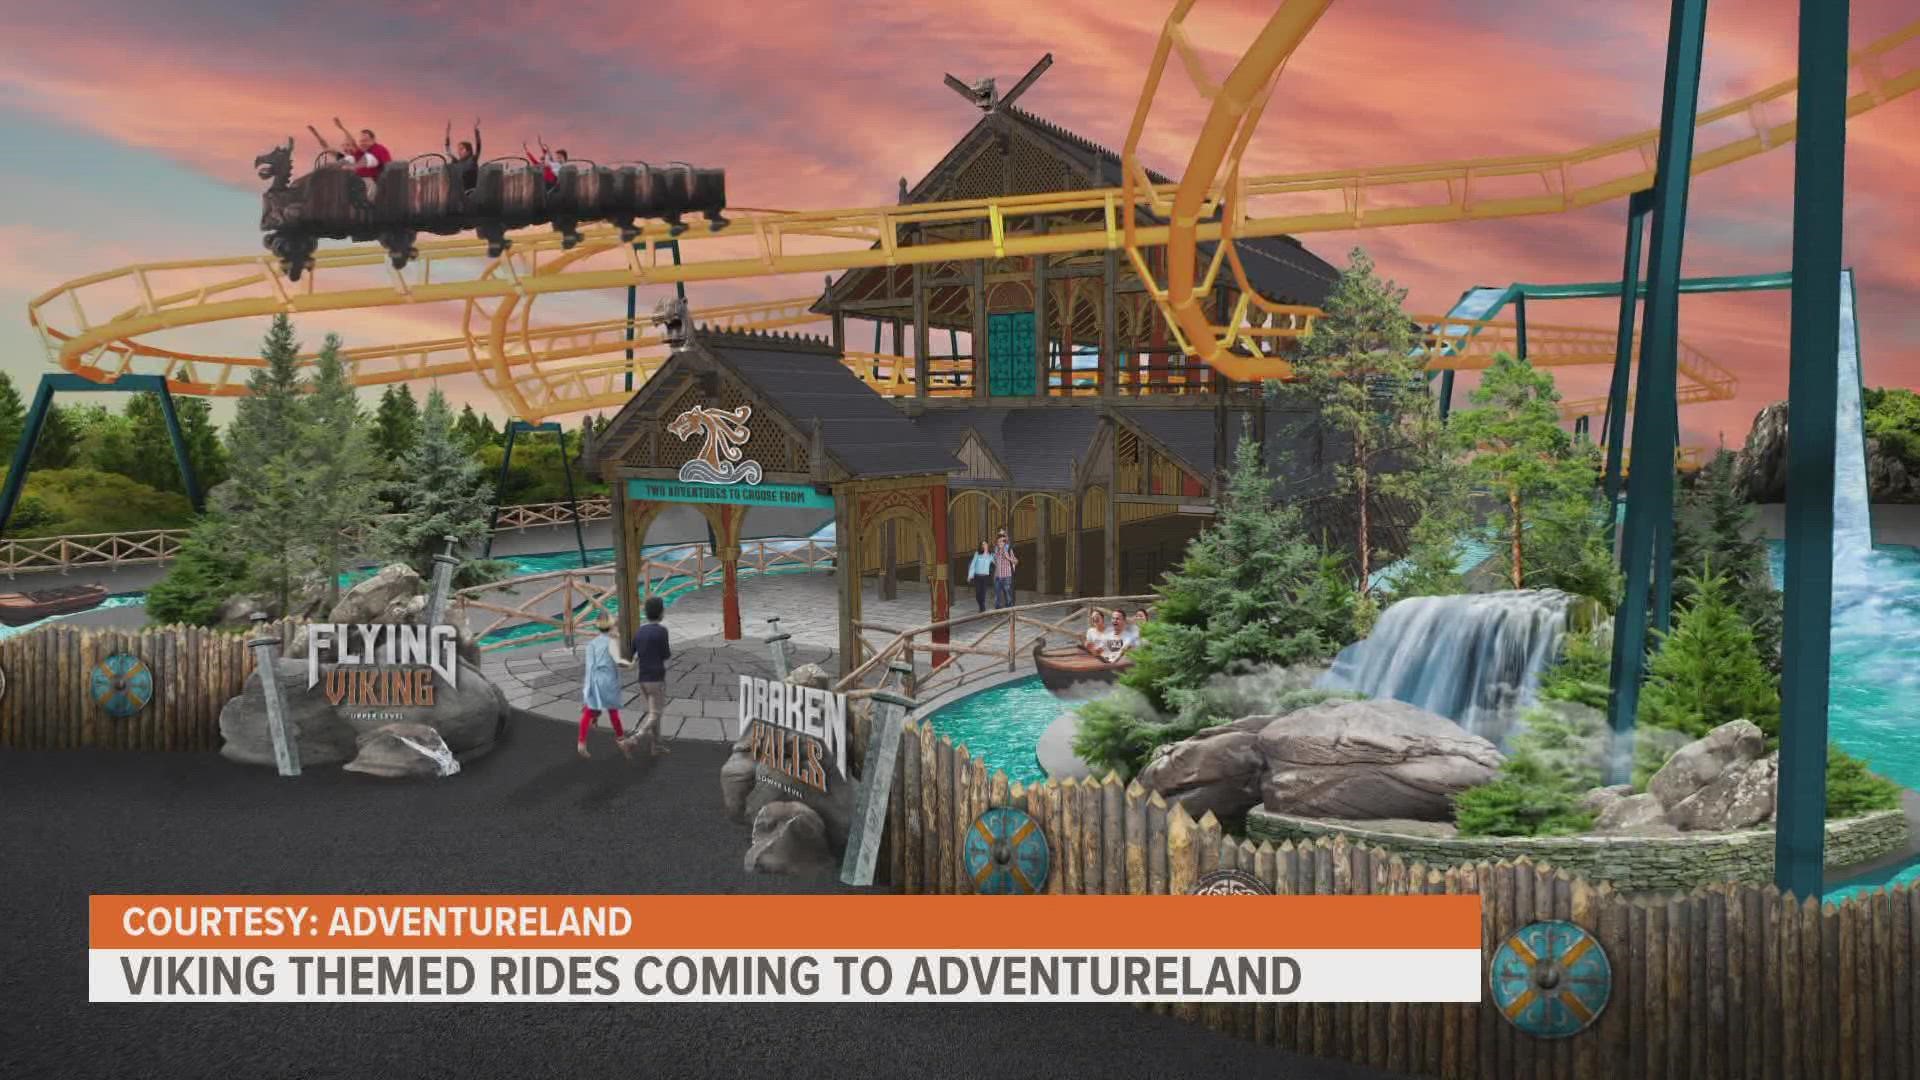 Draken Falls is one of two new rides that will appear next summer. The second is a new roller coaster called Flying Viking.